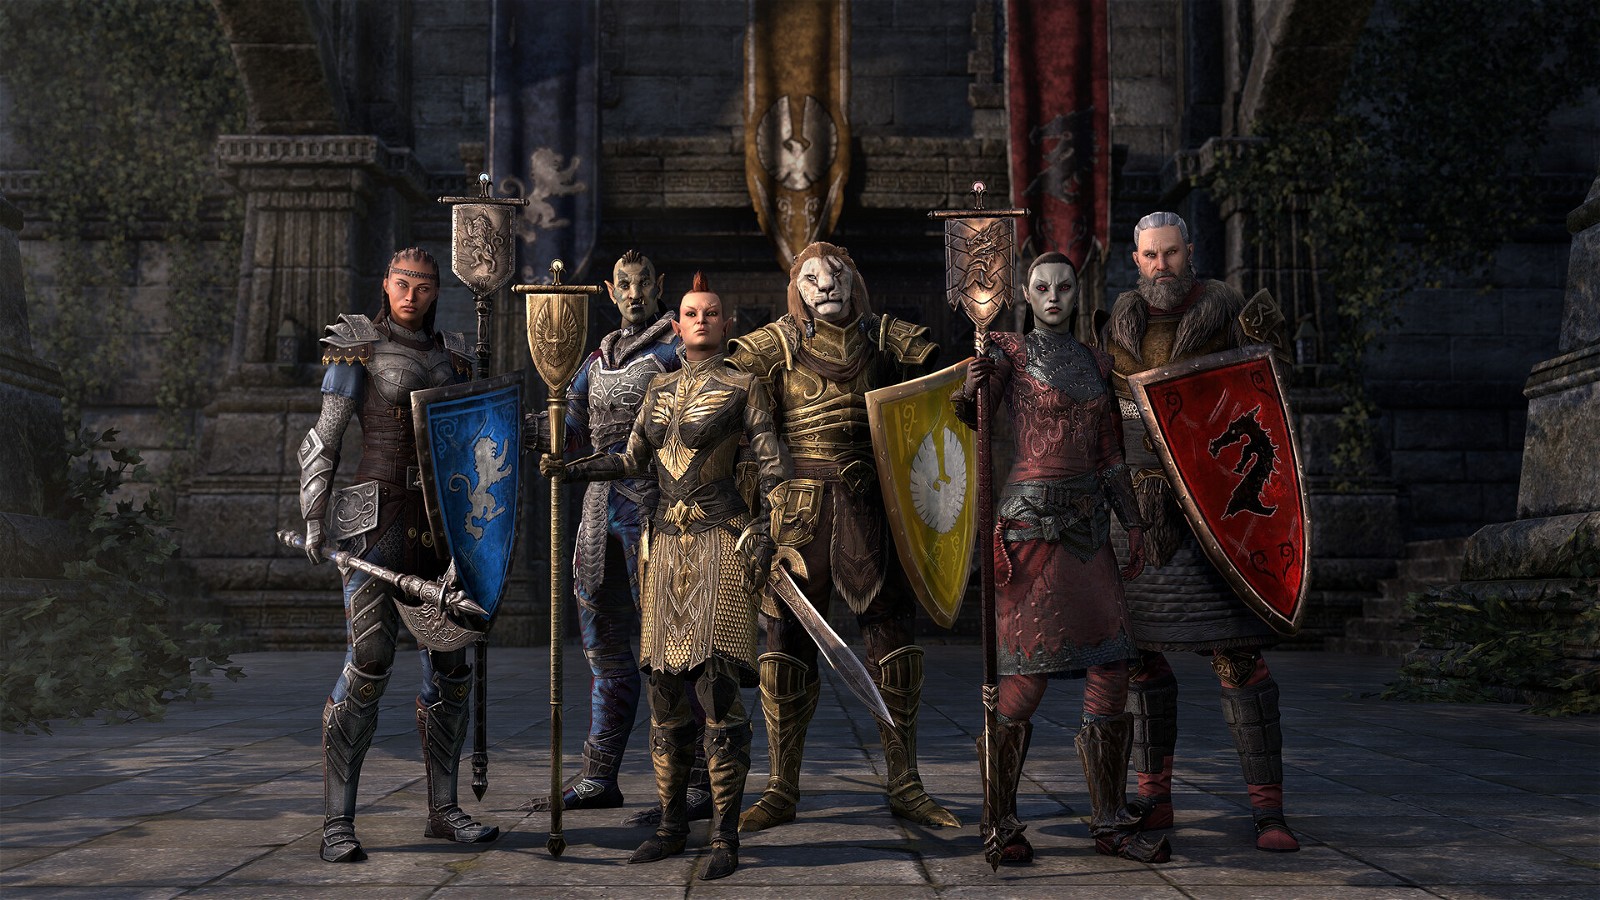 Todd Howard's Bethesda finds themselves in the same situation where The Elder Scrolls 6 will impact their other title called The Elder Scrolls Online. 